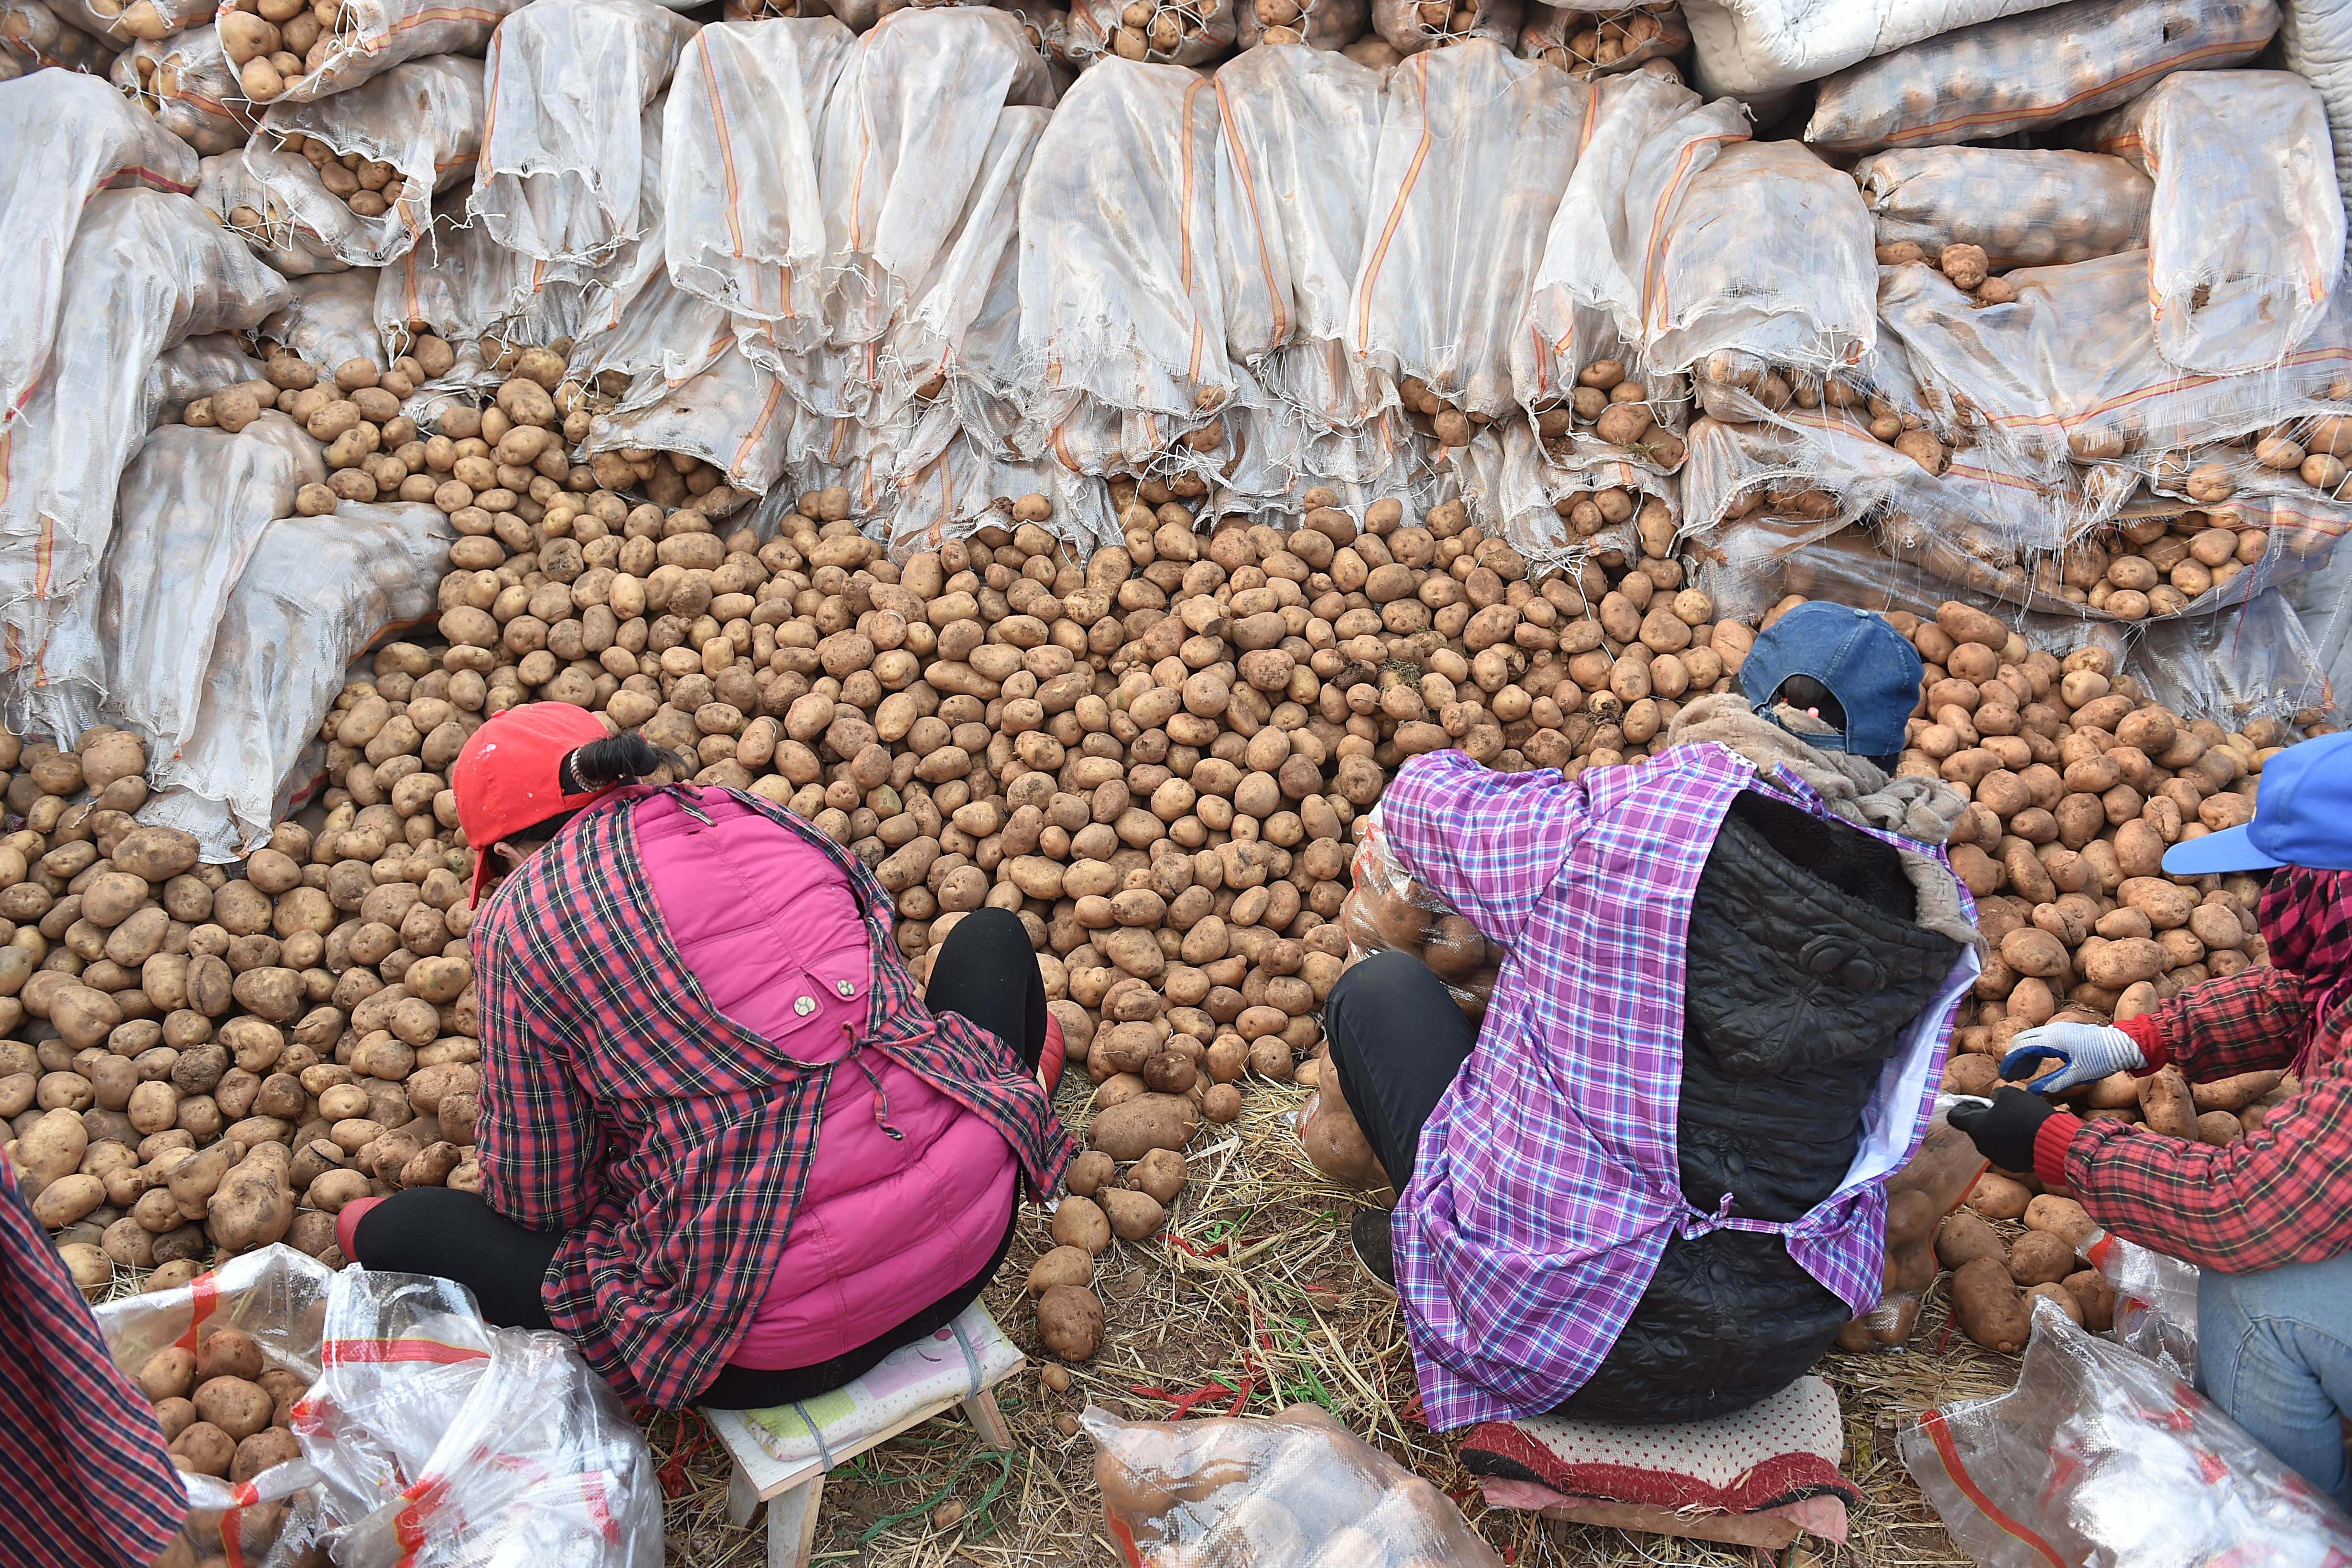 Potatoes nearly swamp two dealers in Shaanxi province as consumer sentiment in China was clouded by the outlook for jobs the real estate market. Photo: Xinhua